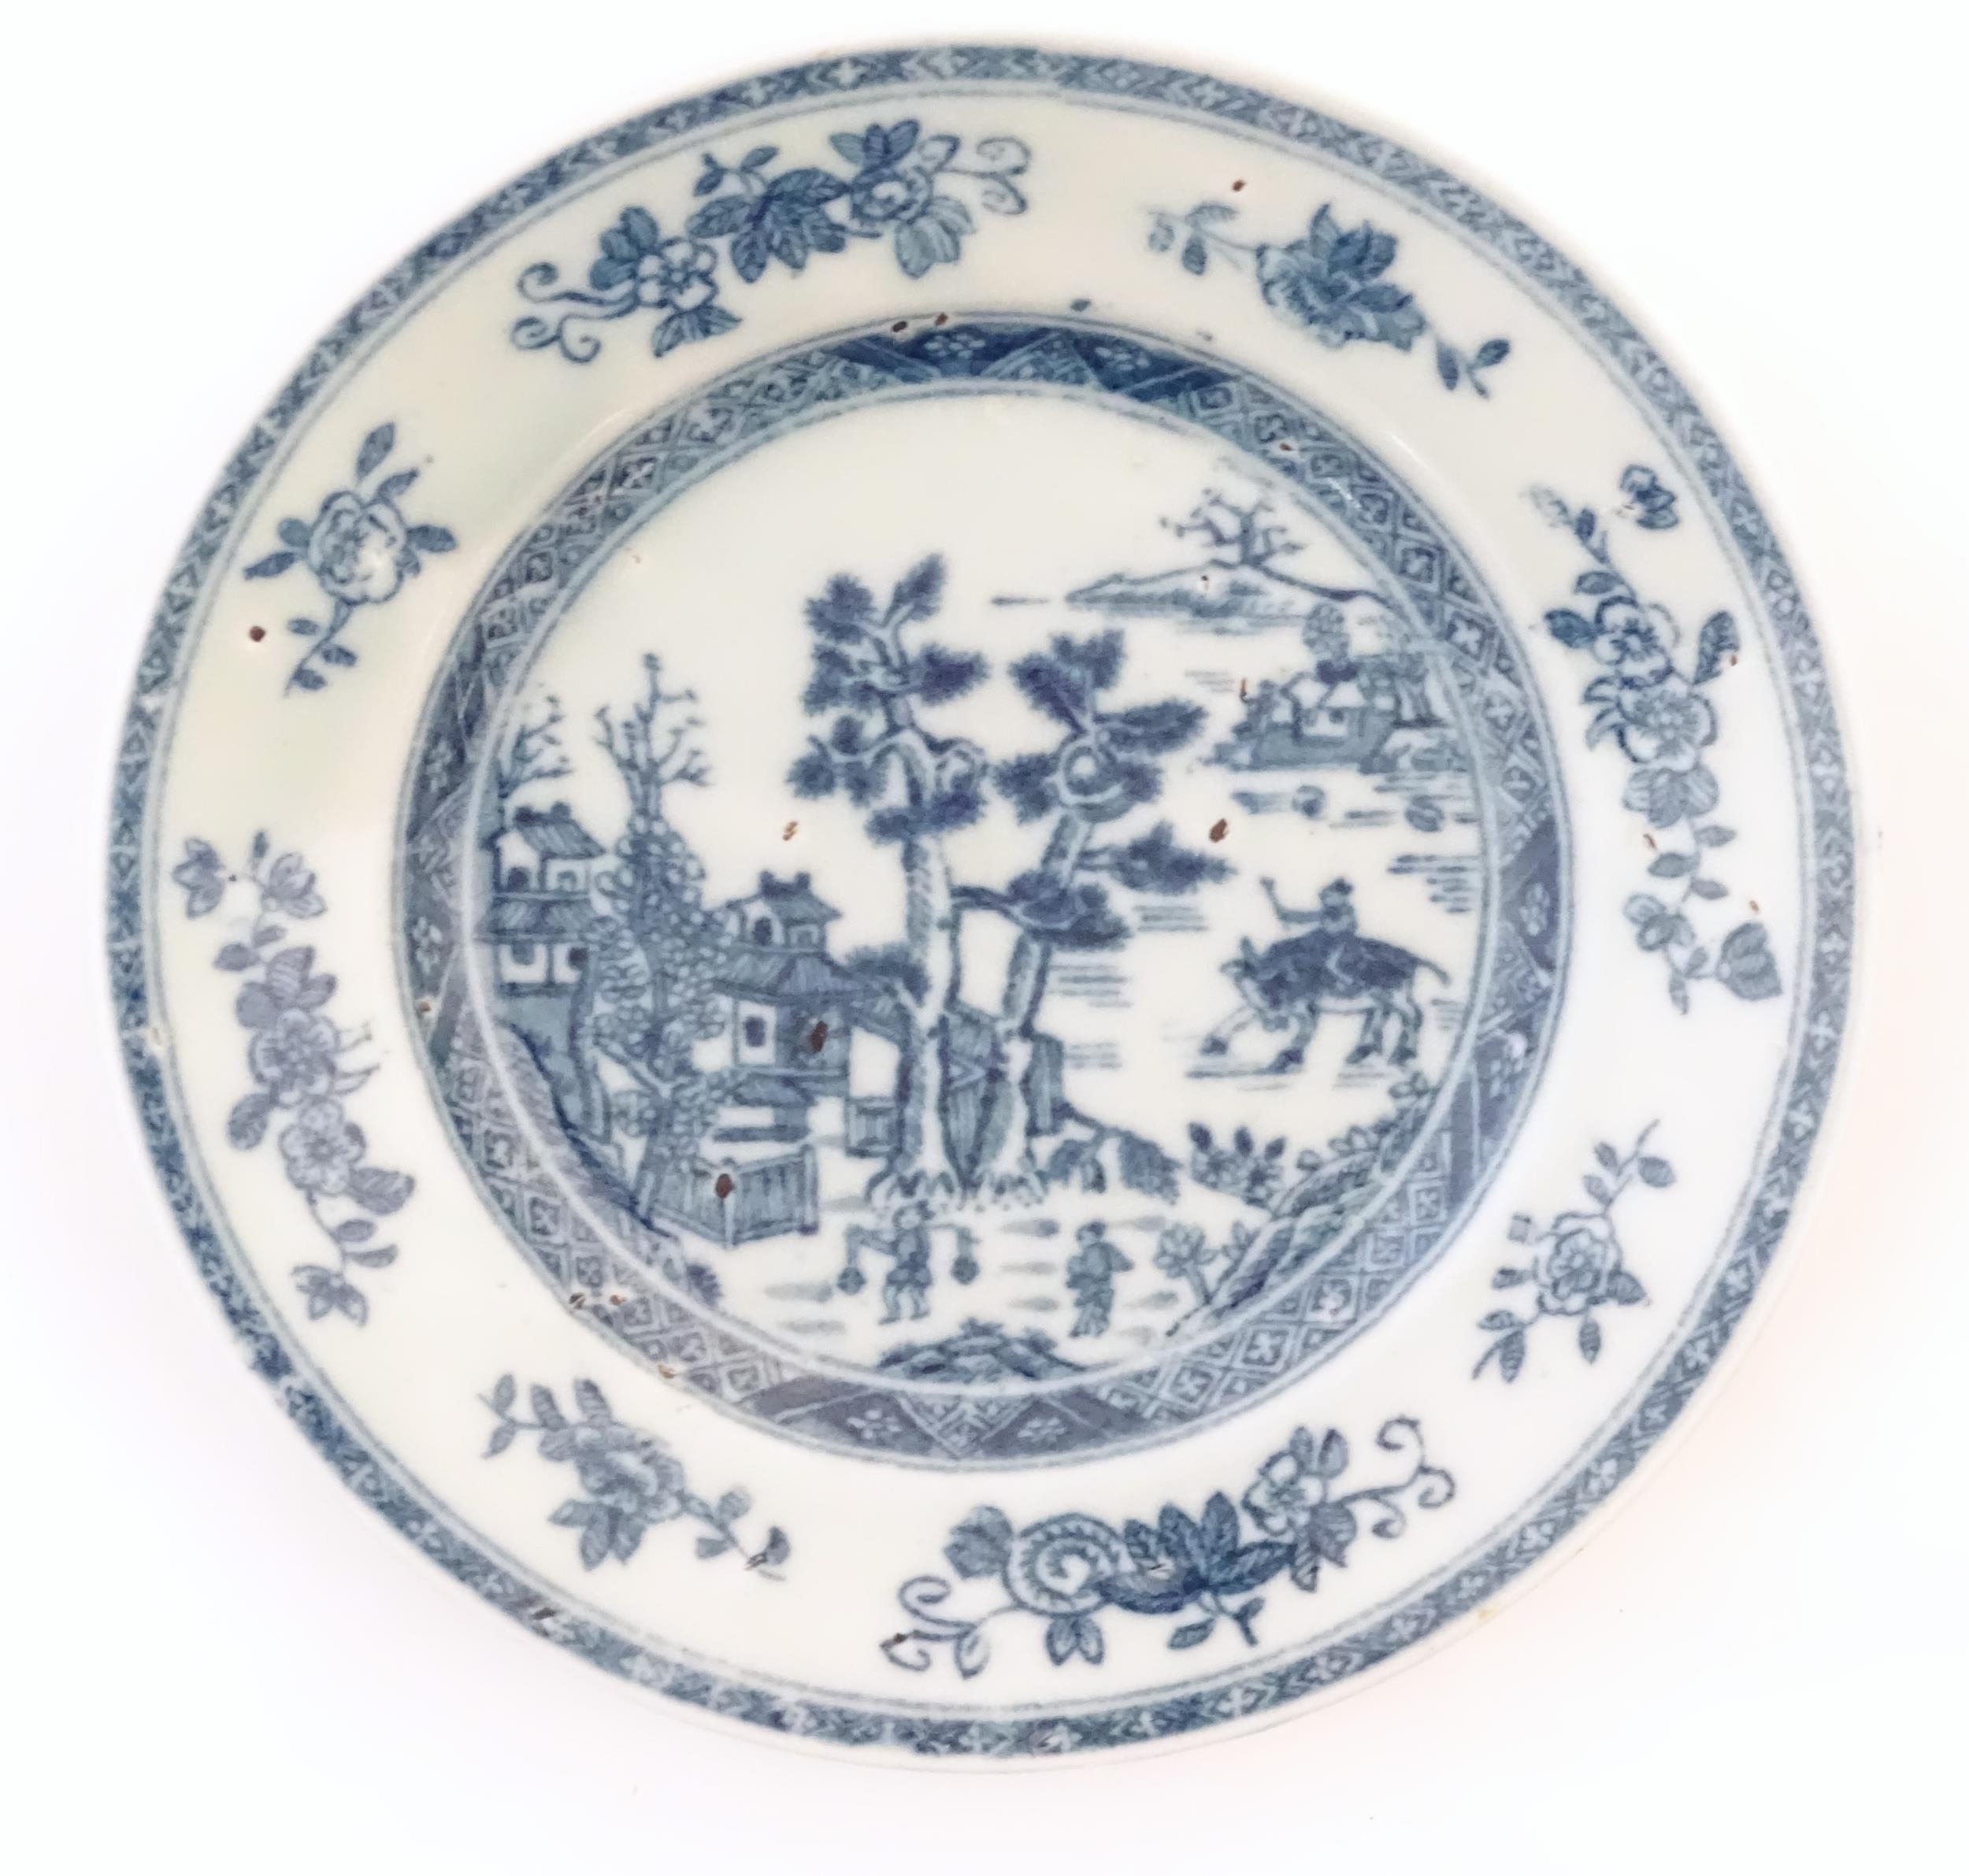 A Chinese blue and white plate depicting a landscape scene with figures, trees, pagodas etc. with